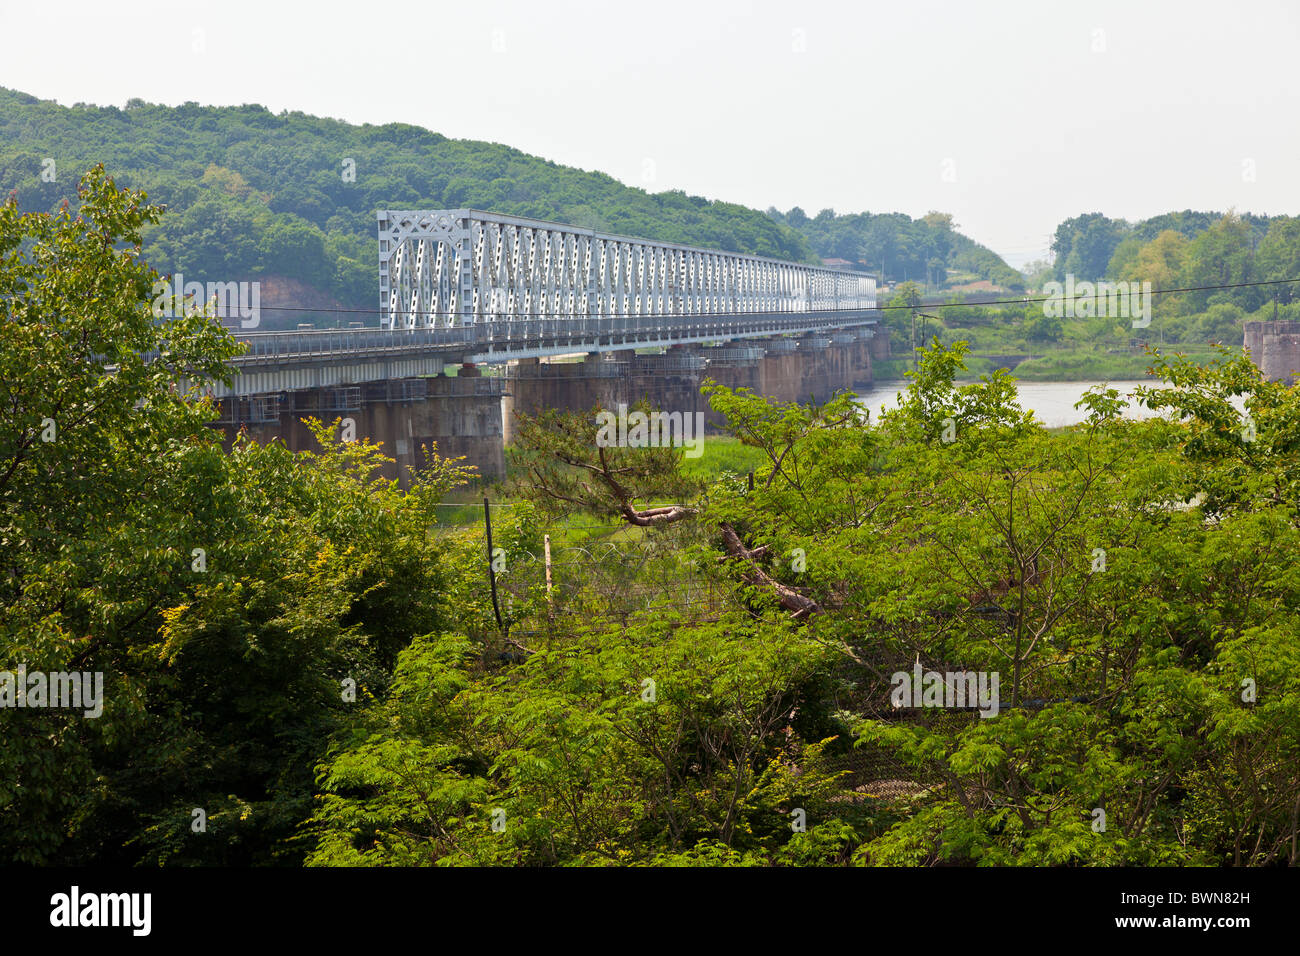 Freedom and railway bridge over Imjin River between North and South Korea, DMZ Demilitarized Zone, South Korea. JMH3830 Stock Photo